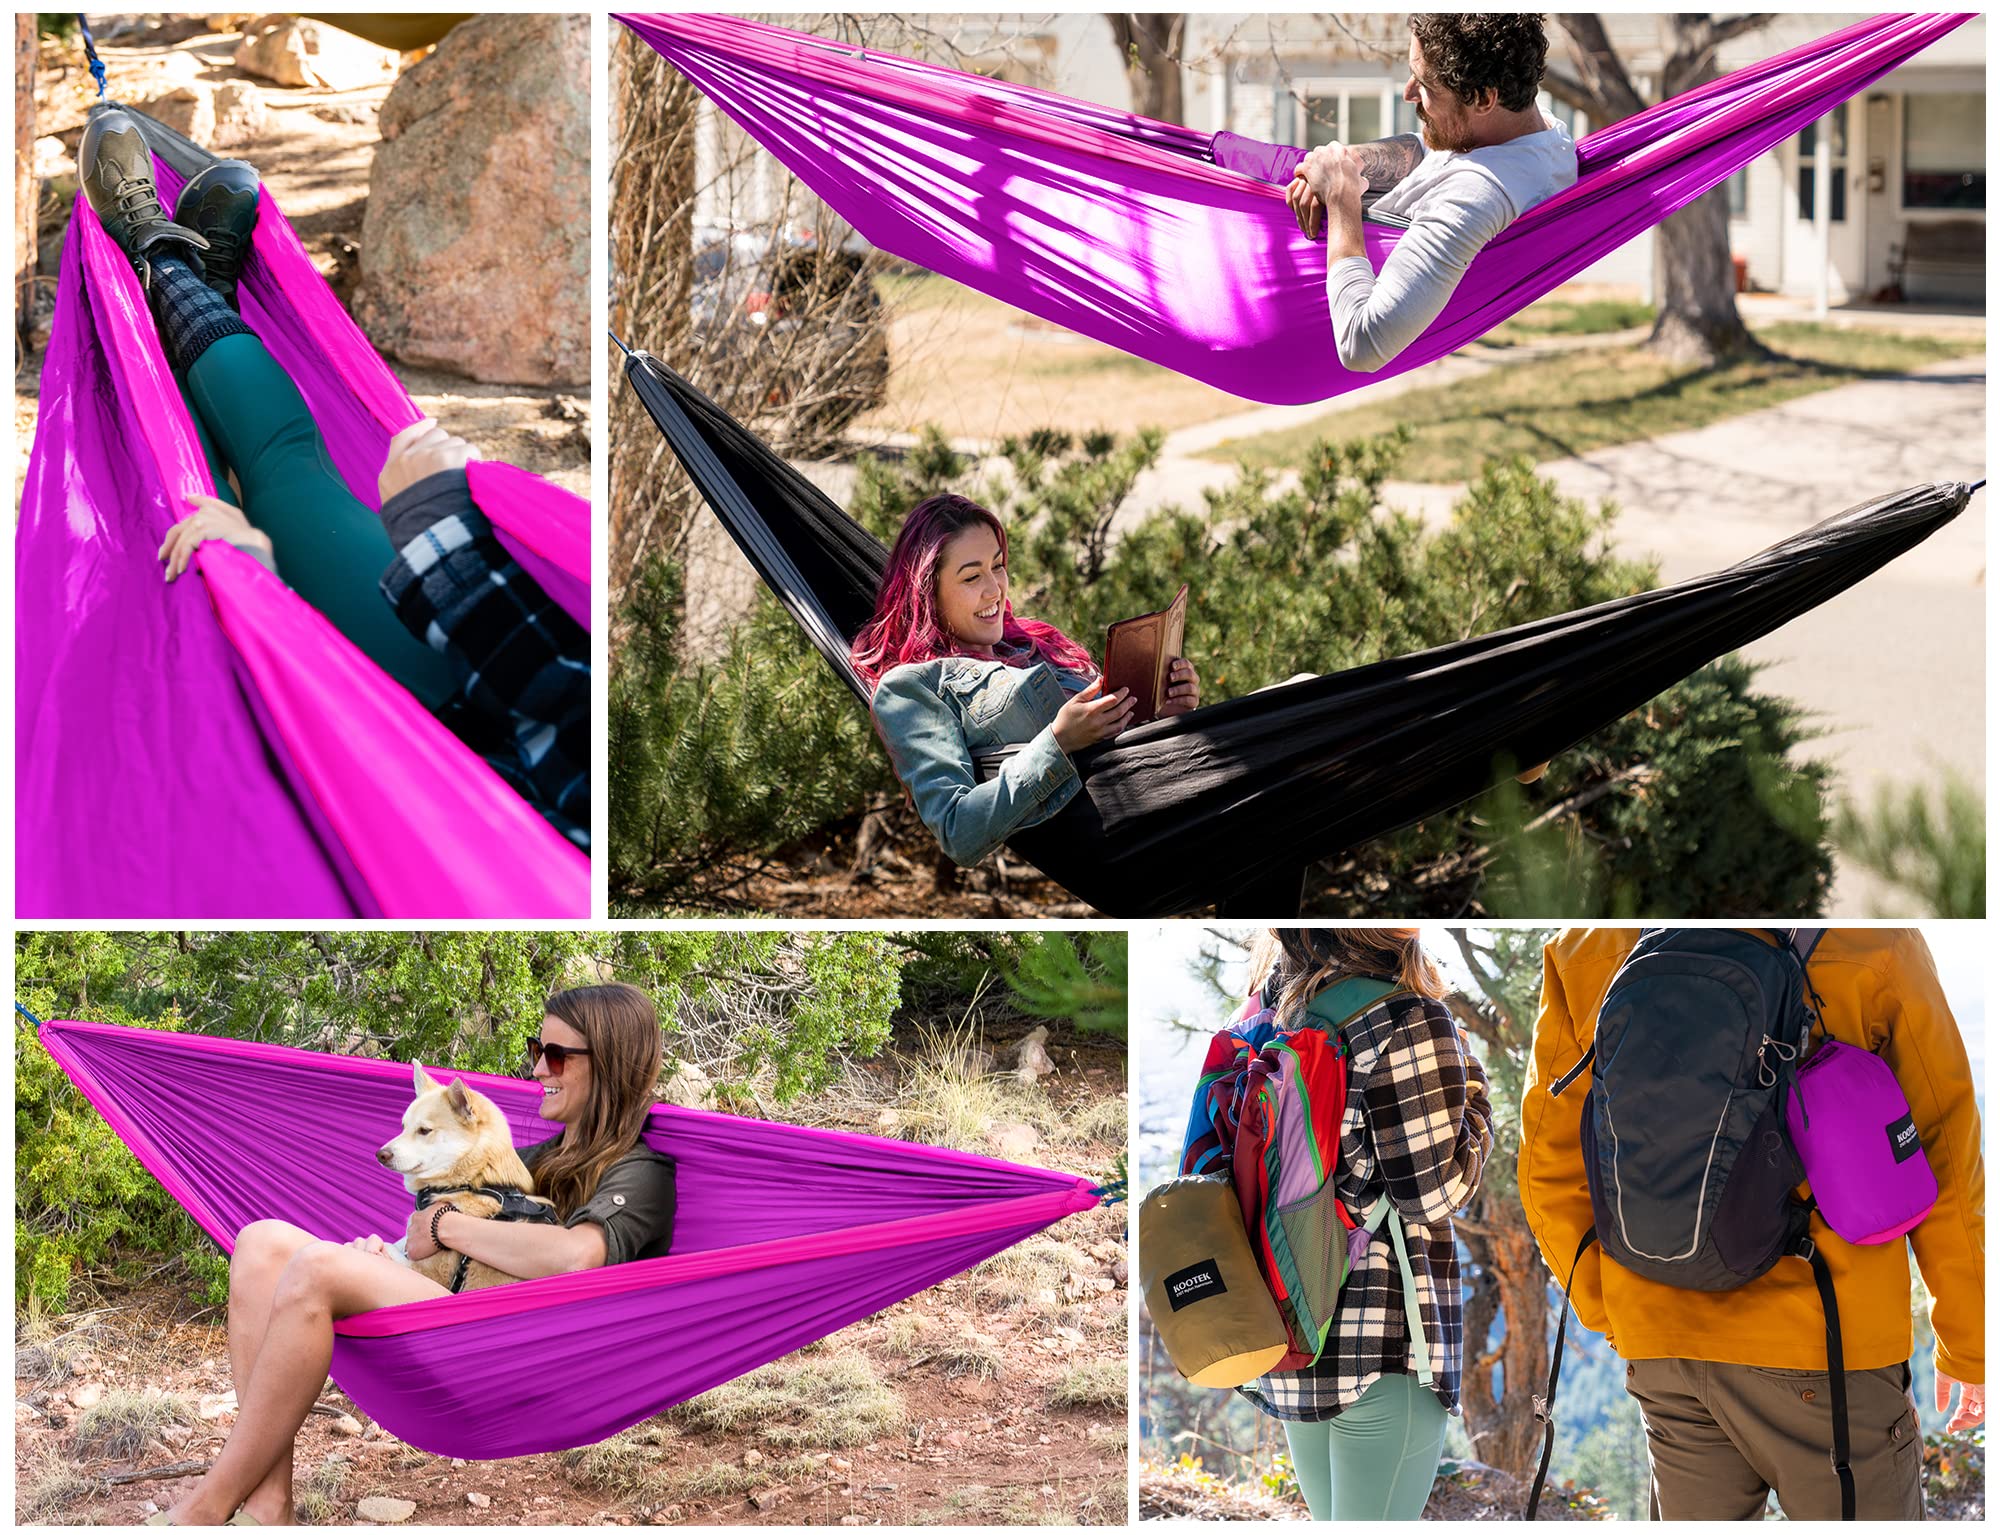 Kootek Camping Hammock Double & Single Portable Hammocks Camping Accessories for Outdoor, Indoor, Backpacking, Travel, Beach, Backyard, Patio, Hiking, Bright Violet & Pink